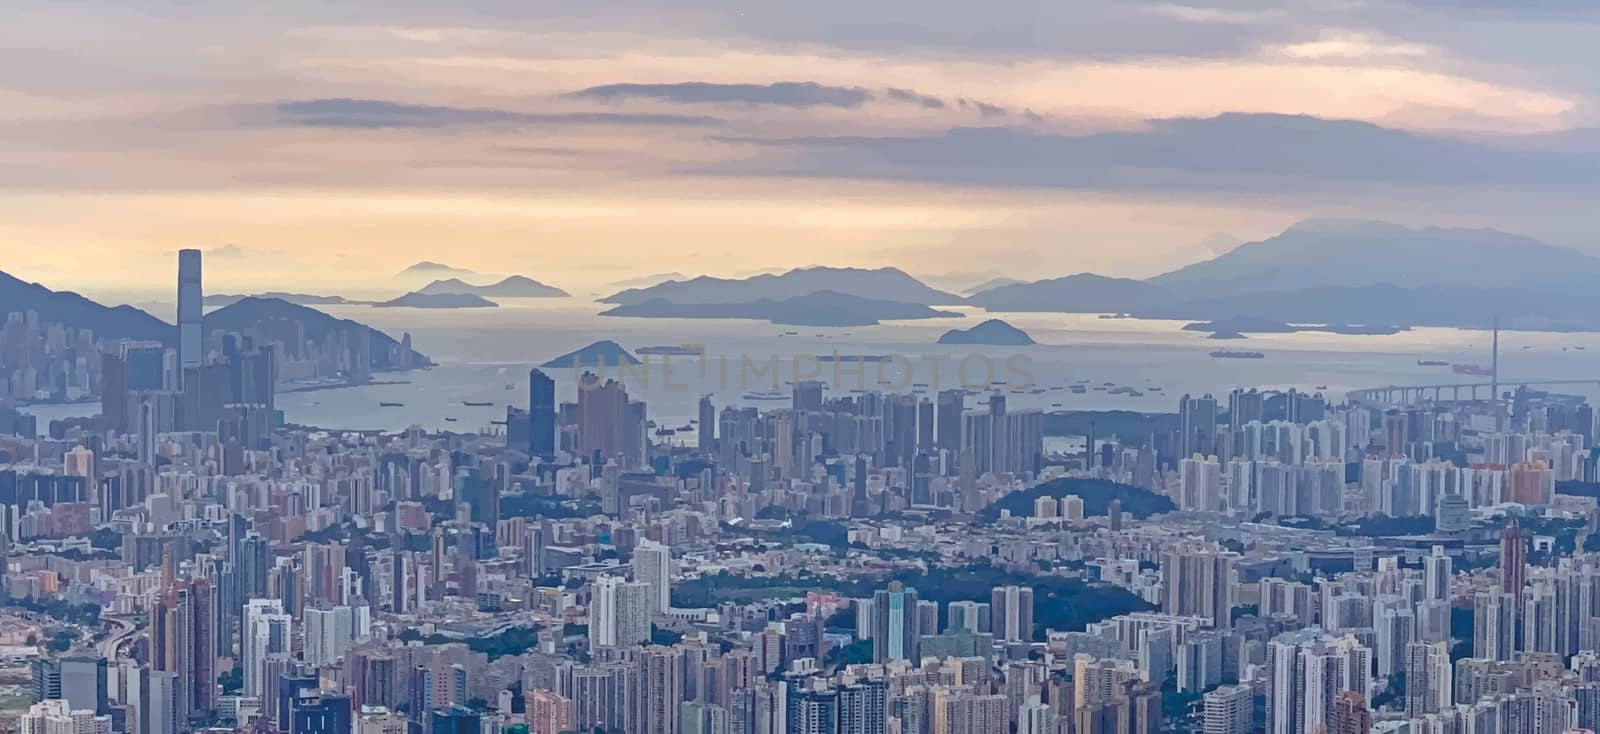 Panorama illustration of Hong Kong cityscape, buildings, mountain by cougarsan